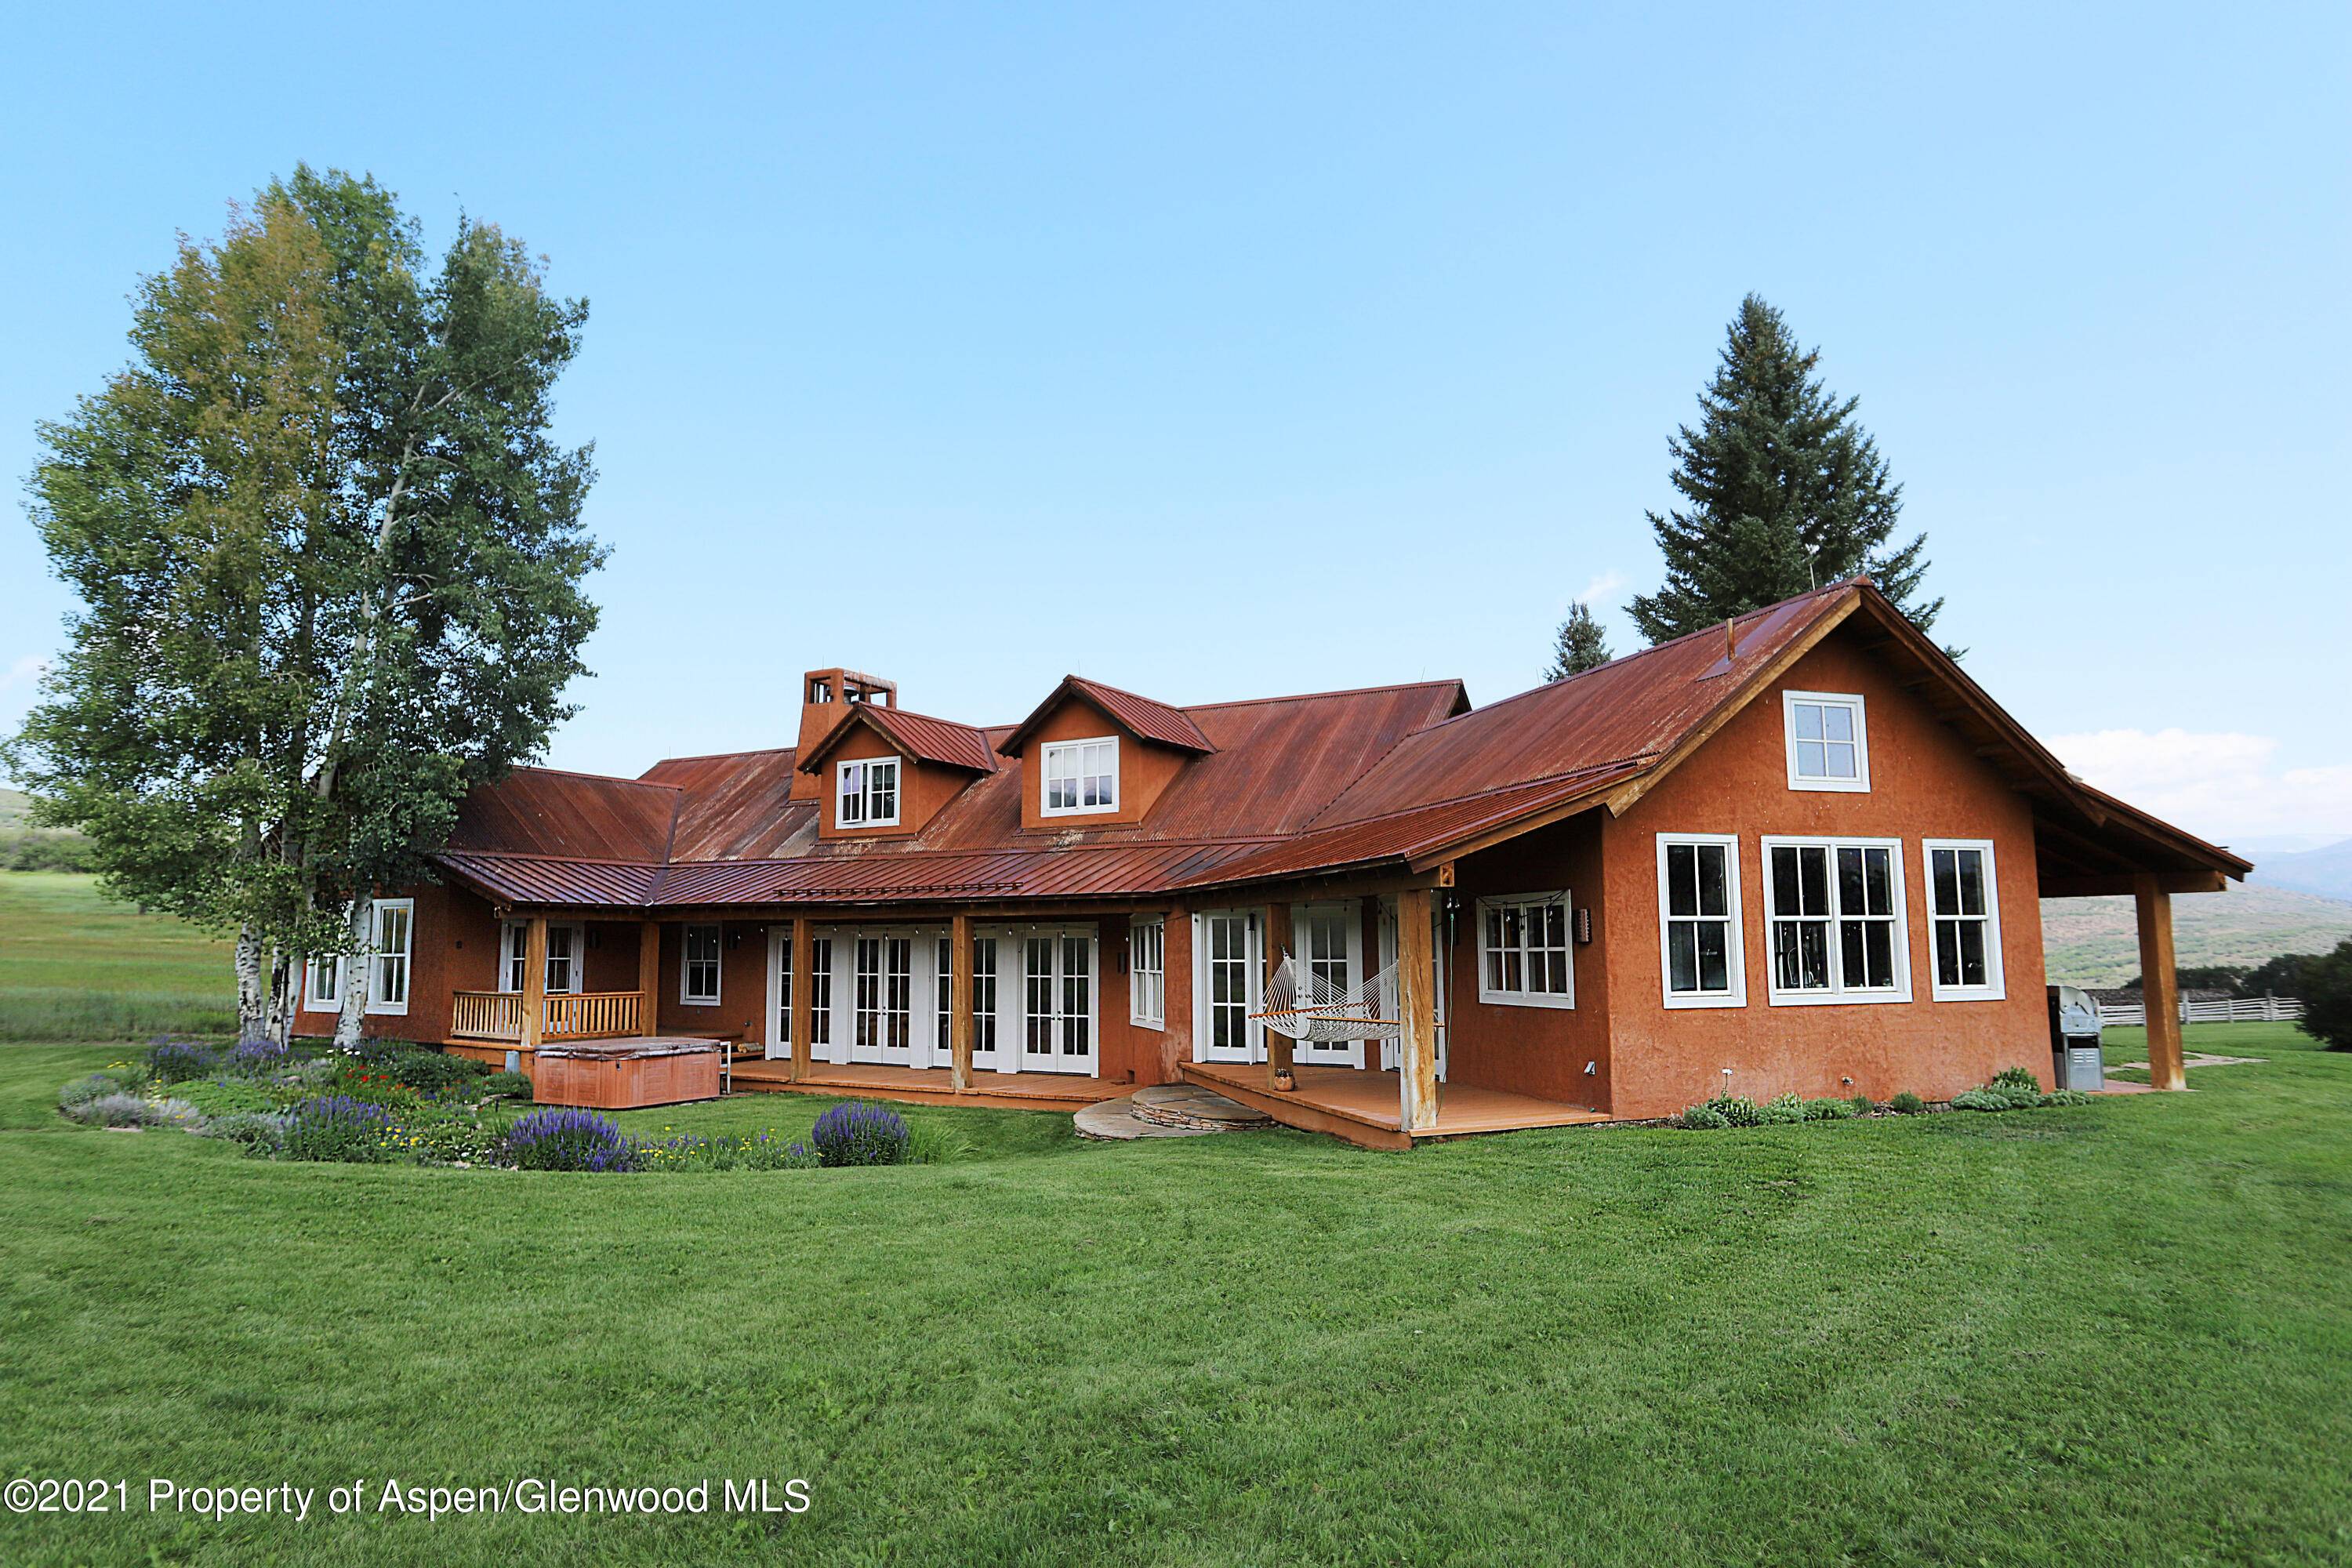 This Ralph Lauren inspired ranch home is perfectly situated on 35 acres within a private ranch in Old Snowmass.